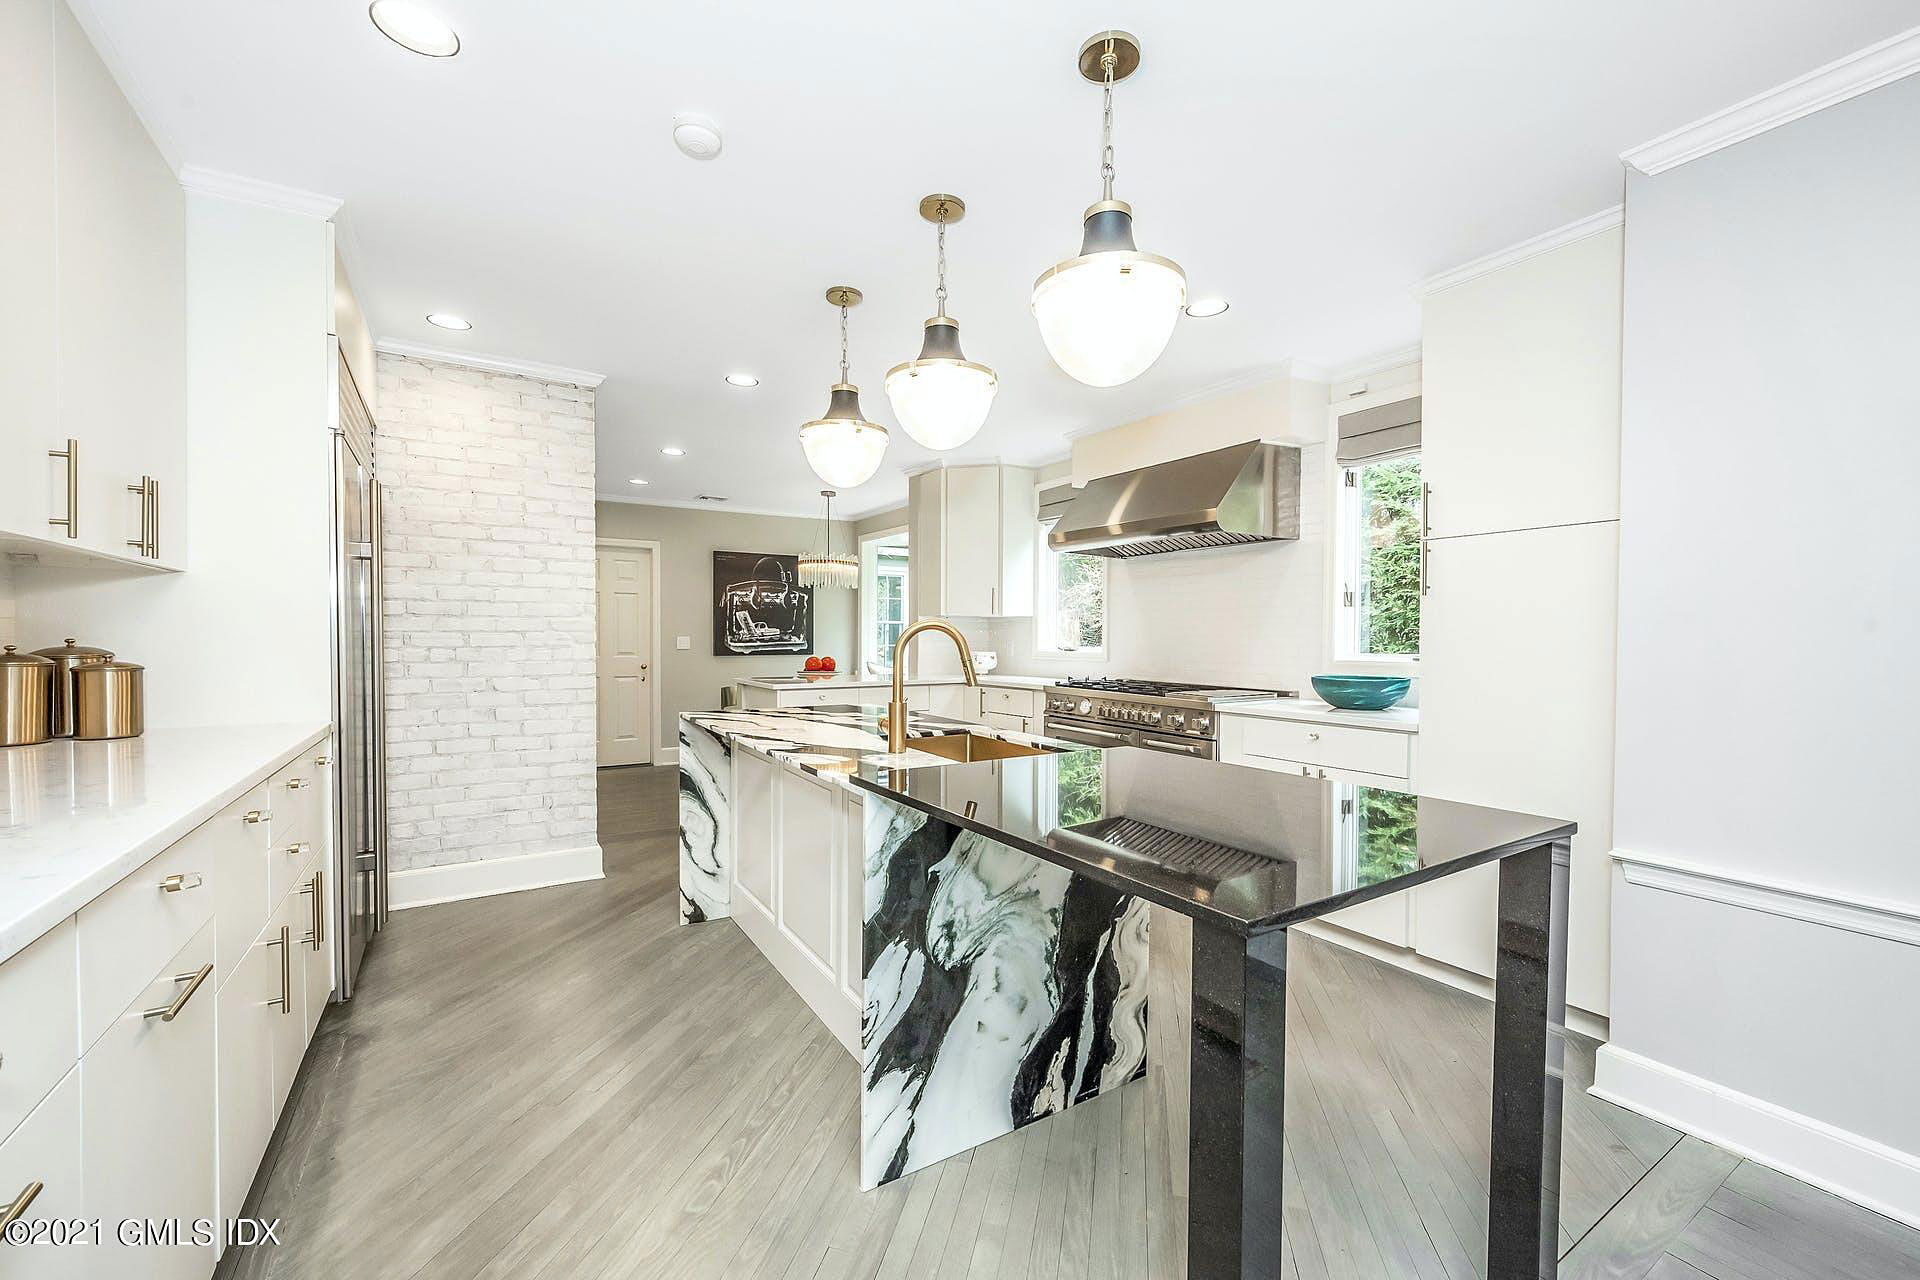 Bethenny Frankel Lists Her $3 Million Connecticut Home: Pics | Us Weekly